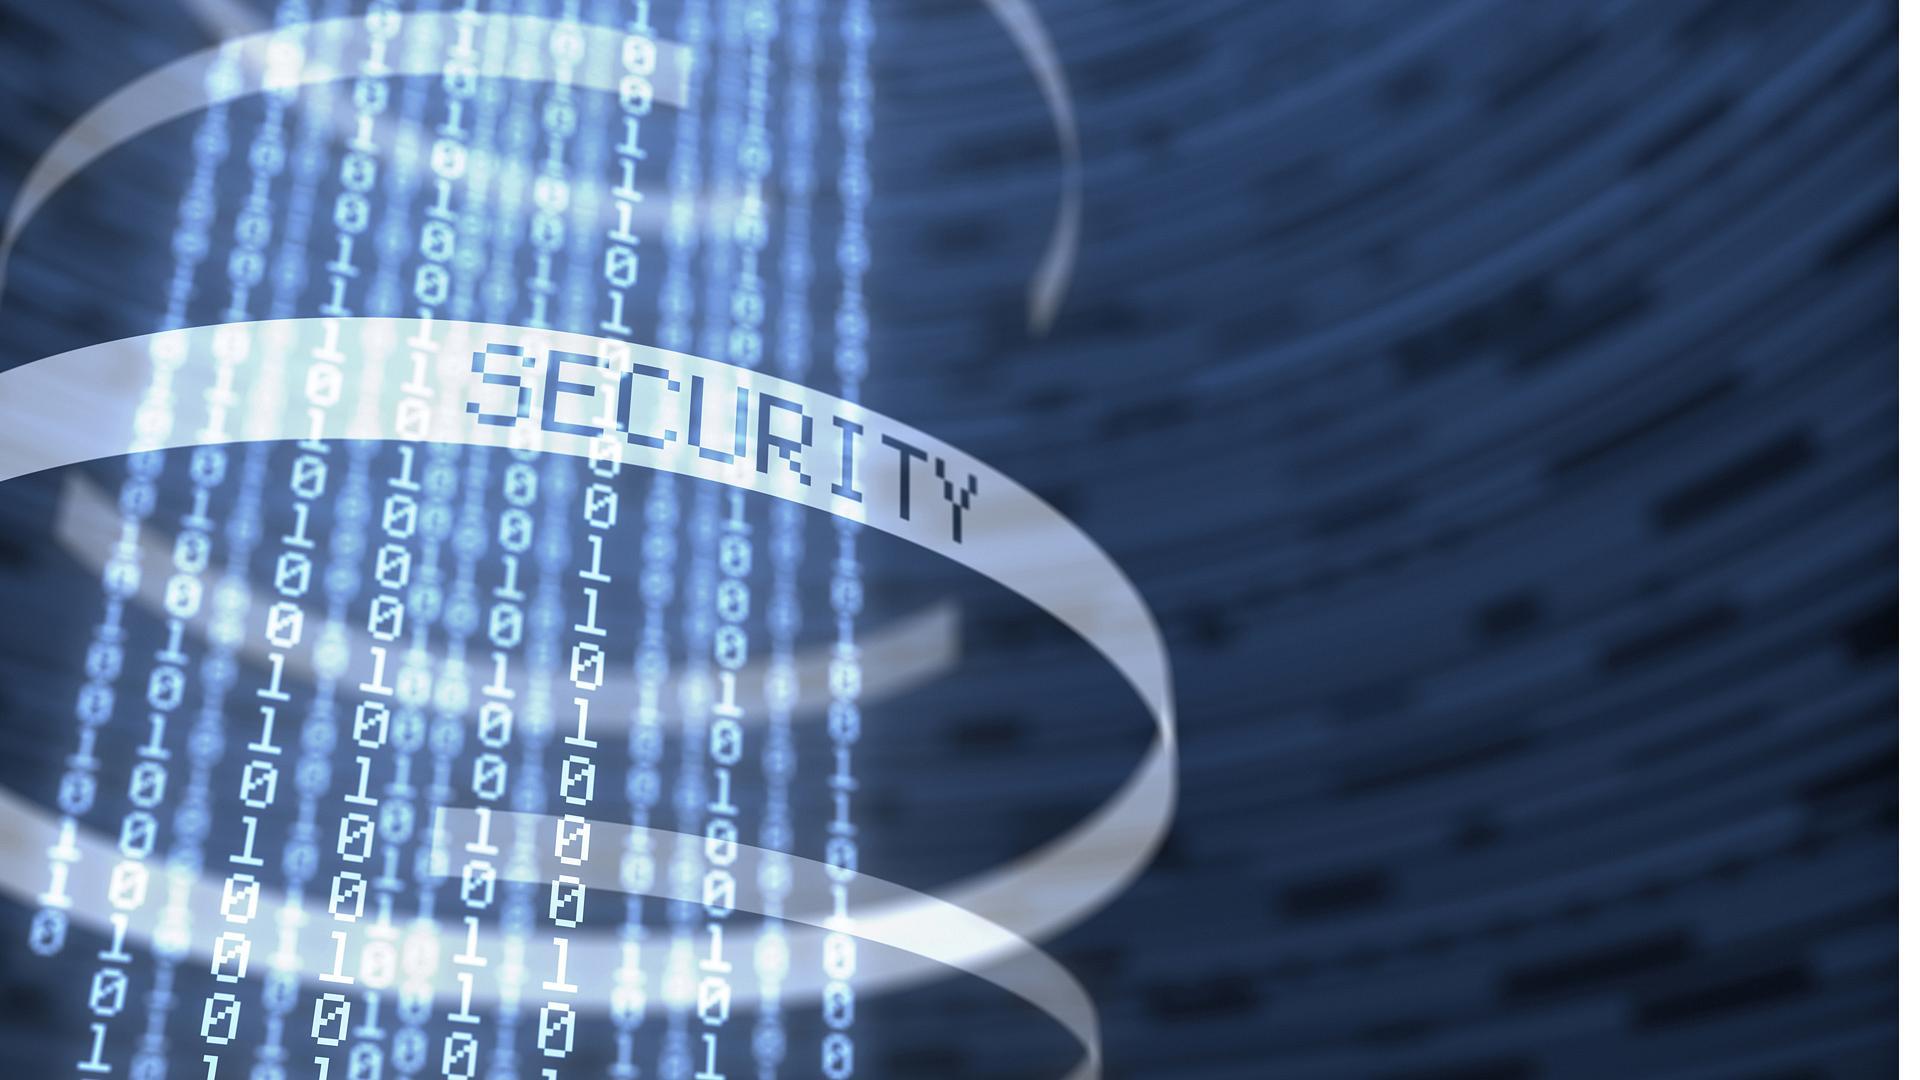 Addressing Cyber Security in U.S. Business